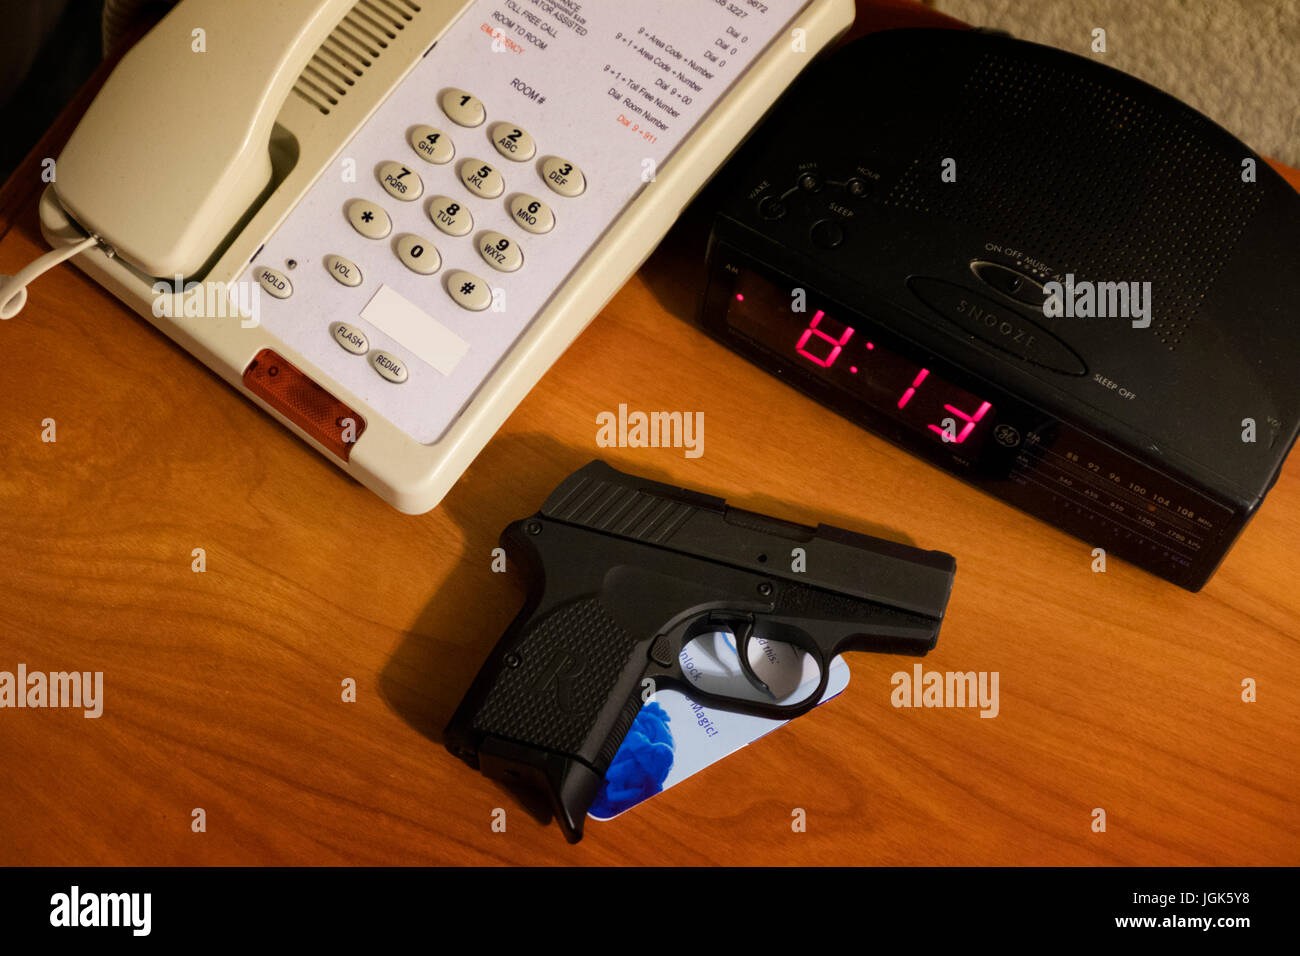 Handgun on a motel room bedside table with telephone and clock radio Stock Photo